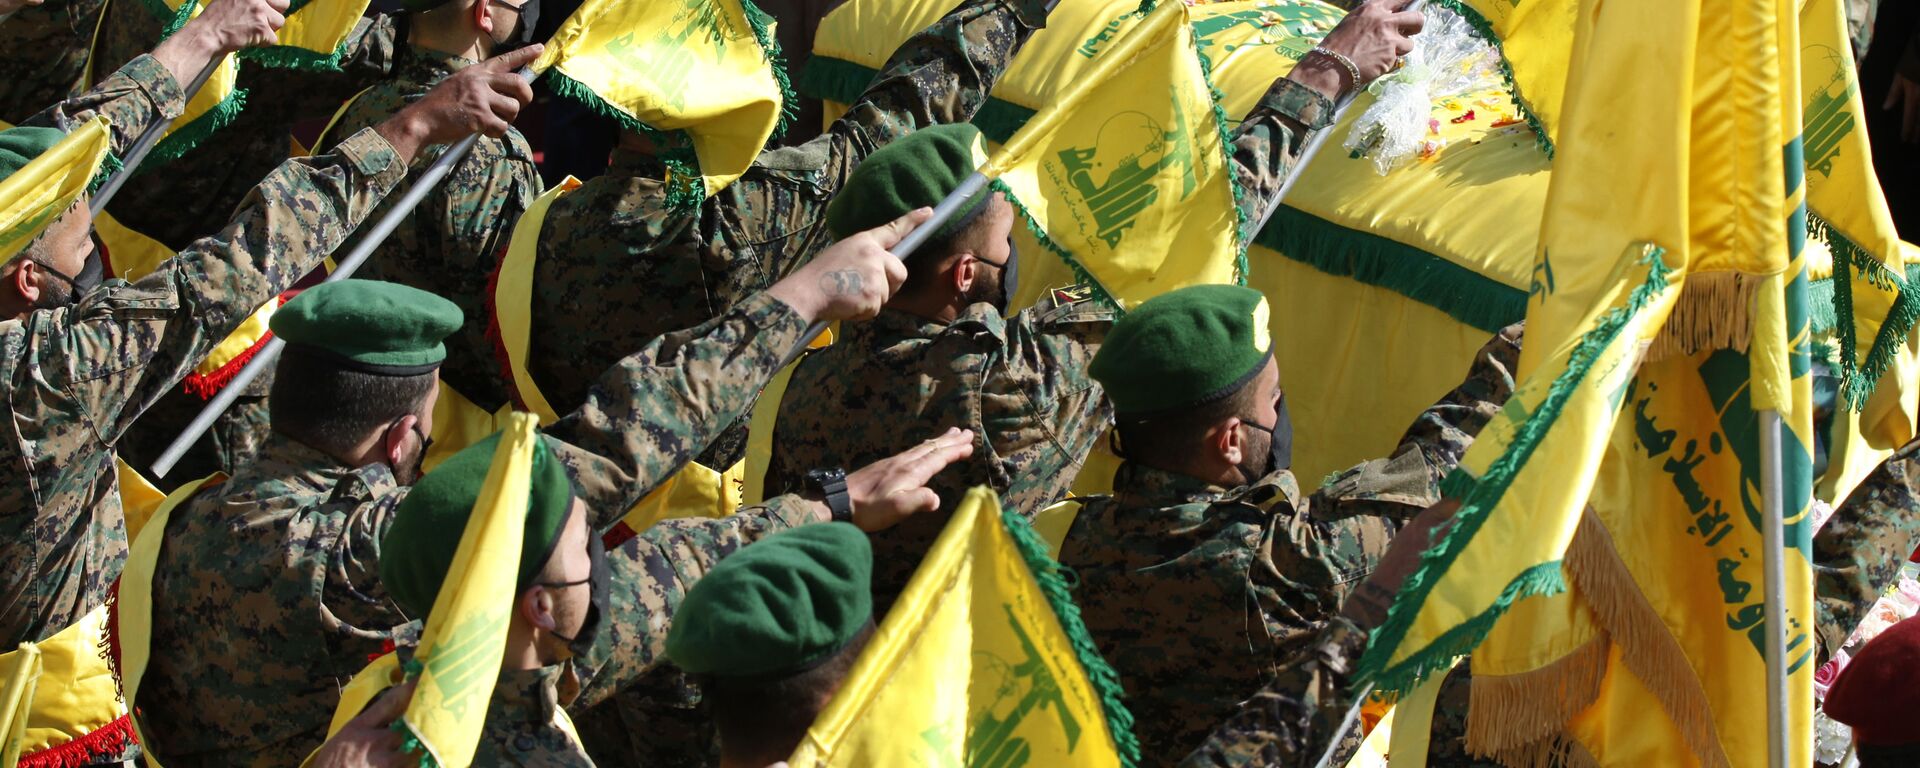 Hezbollah fighters raise their group flags, as they salut the coffin of their comrade Mohammed Tahhan who was shot dead on Friday by Israeli forces along the Lebanon-Israel border, during his funeral procession, in the southern village of Adloun, Lebanon, Saturday, May 15, 2021 - Sputnik International, 1920, 24.11.2021